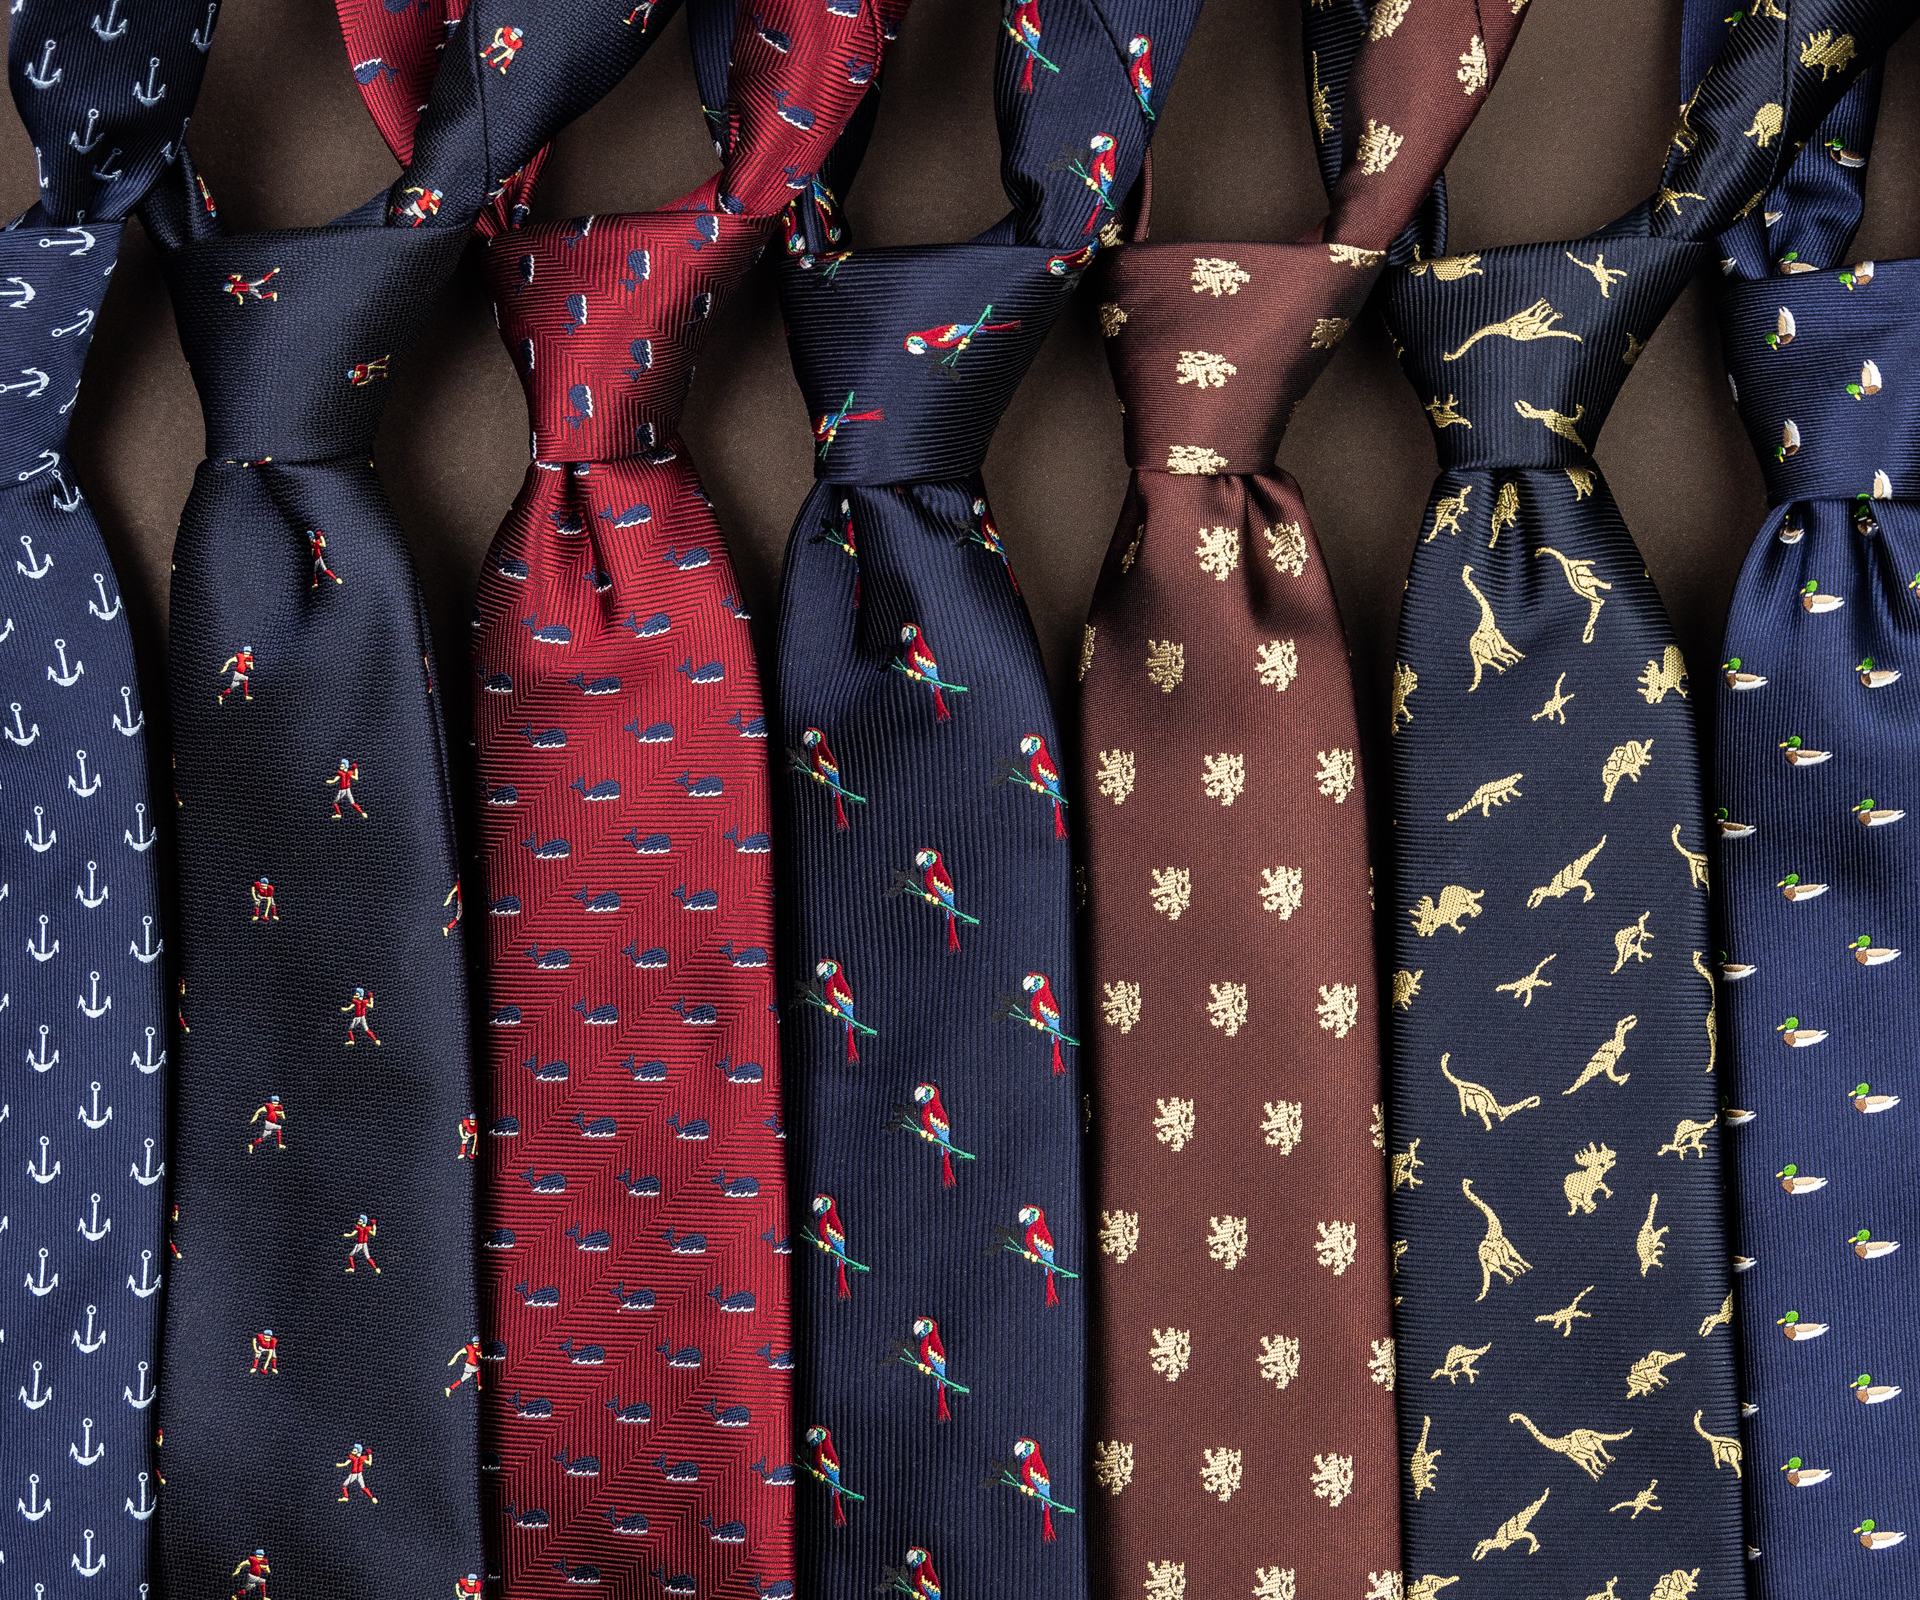 Novelty ties and bow ties